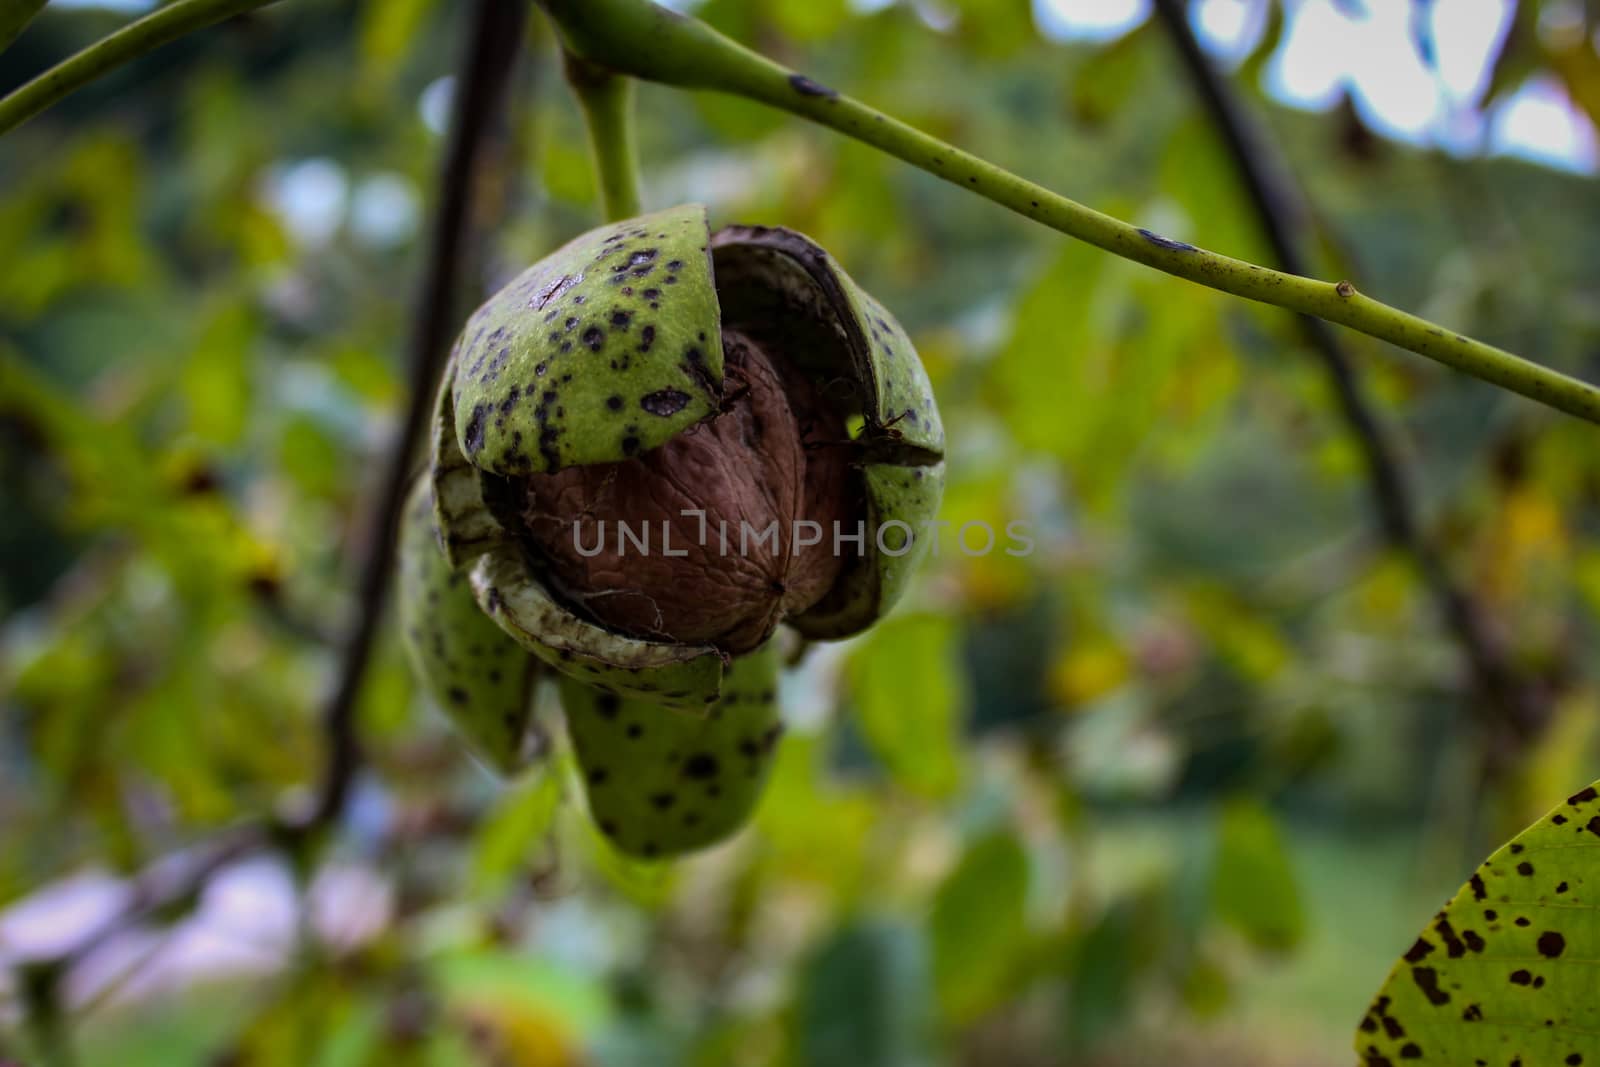 The walnut in the shell almost fell out. Zavidovici, Bosnia and Herzegovina.